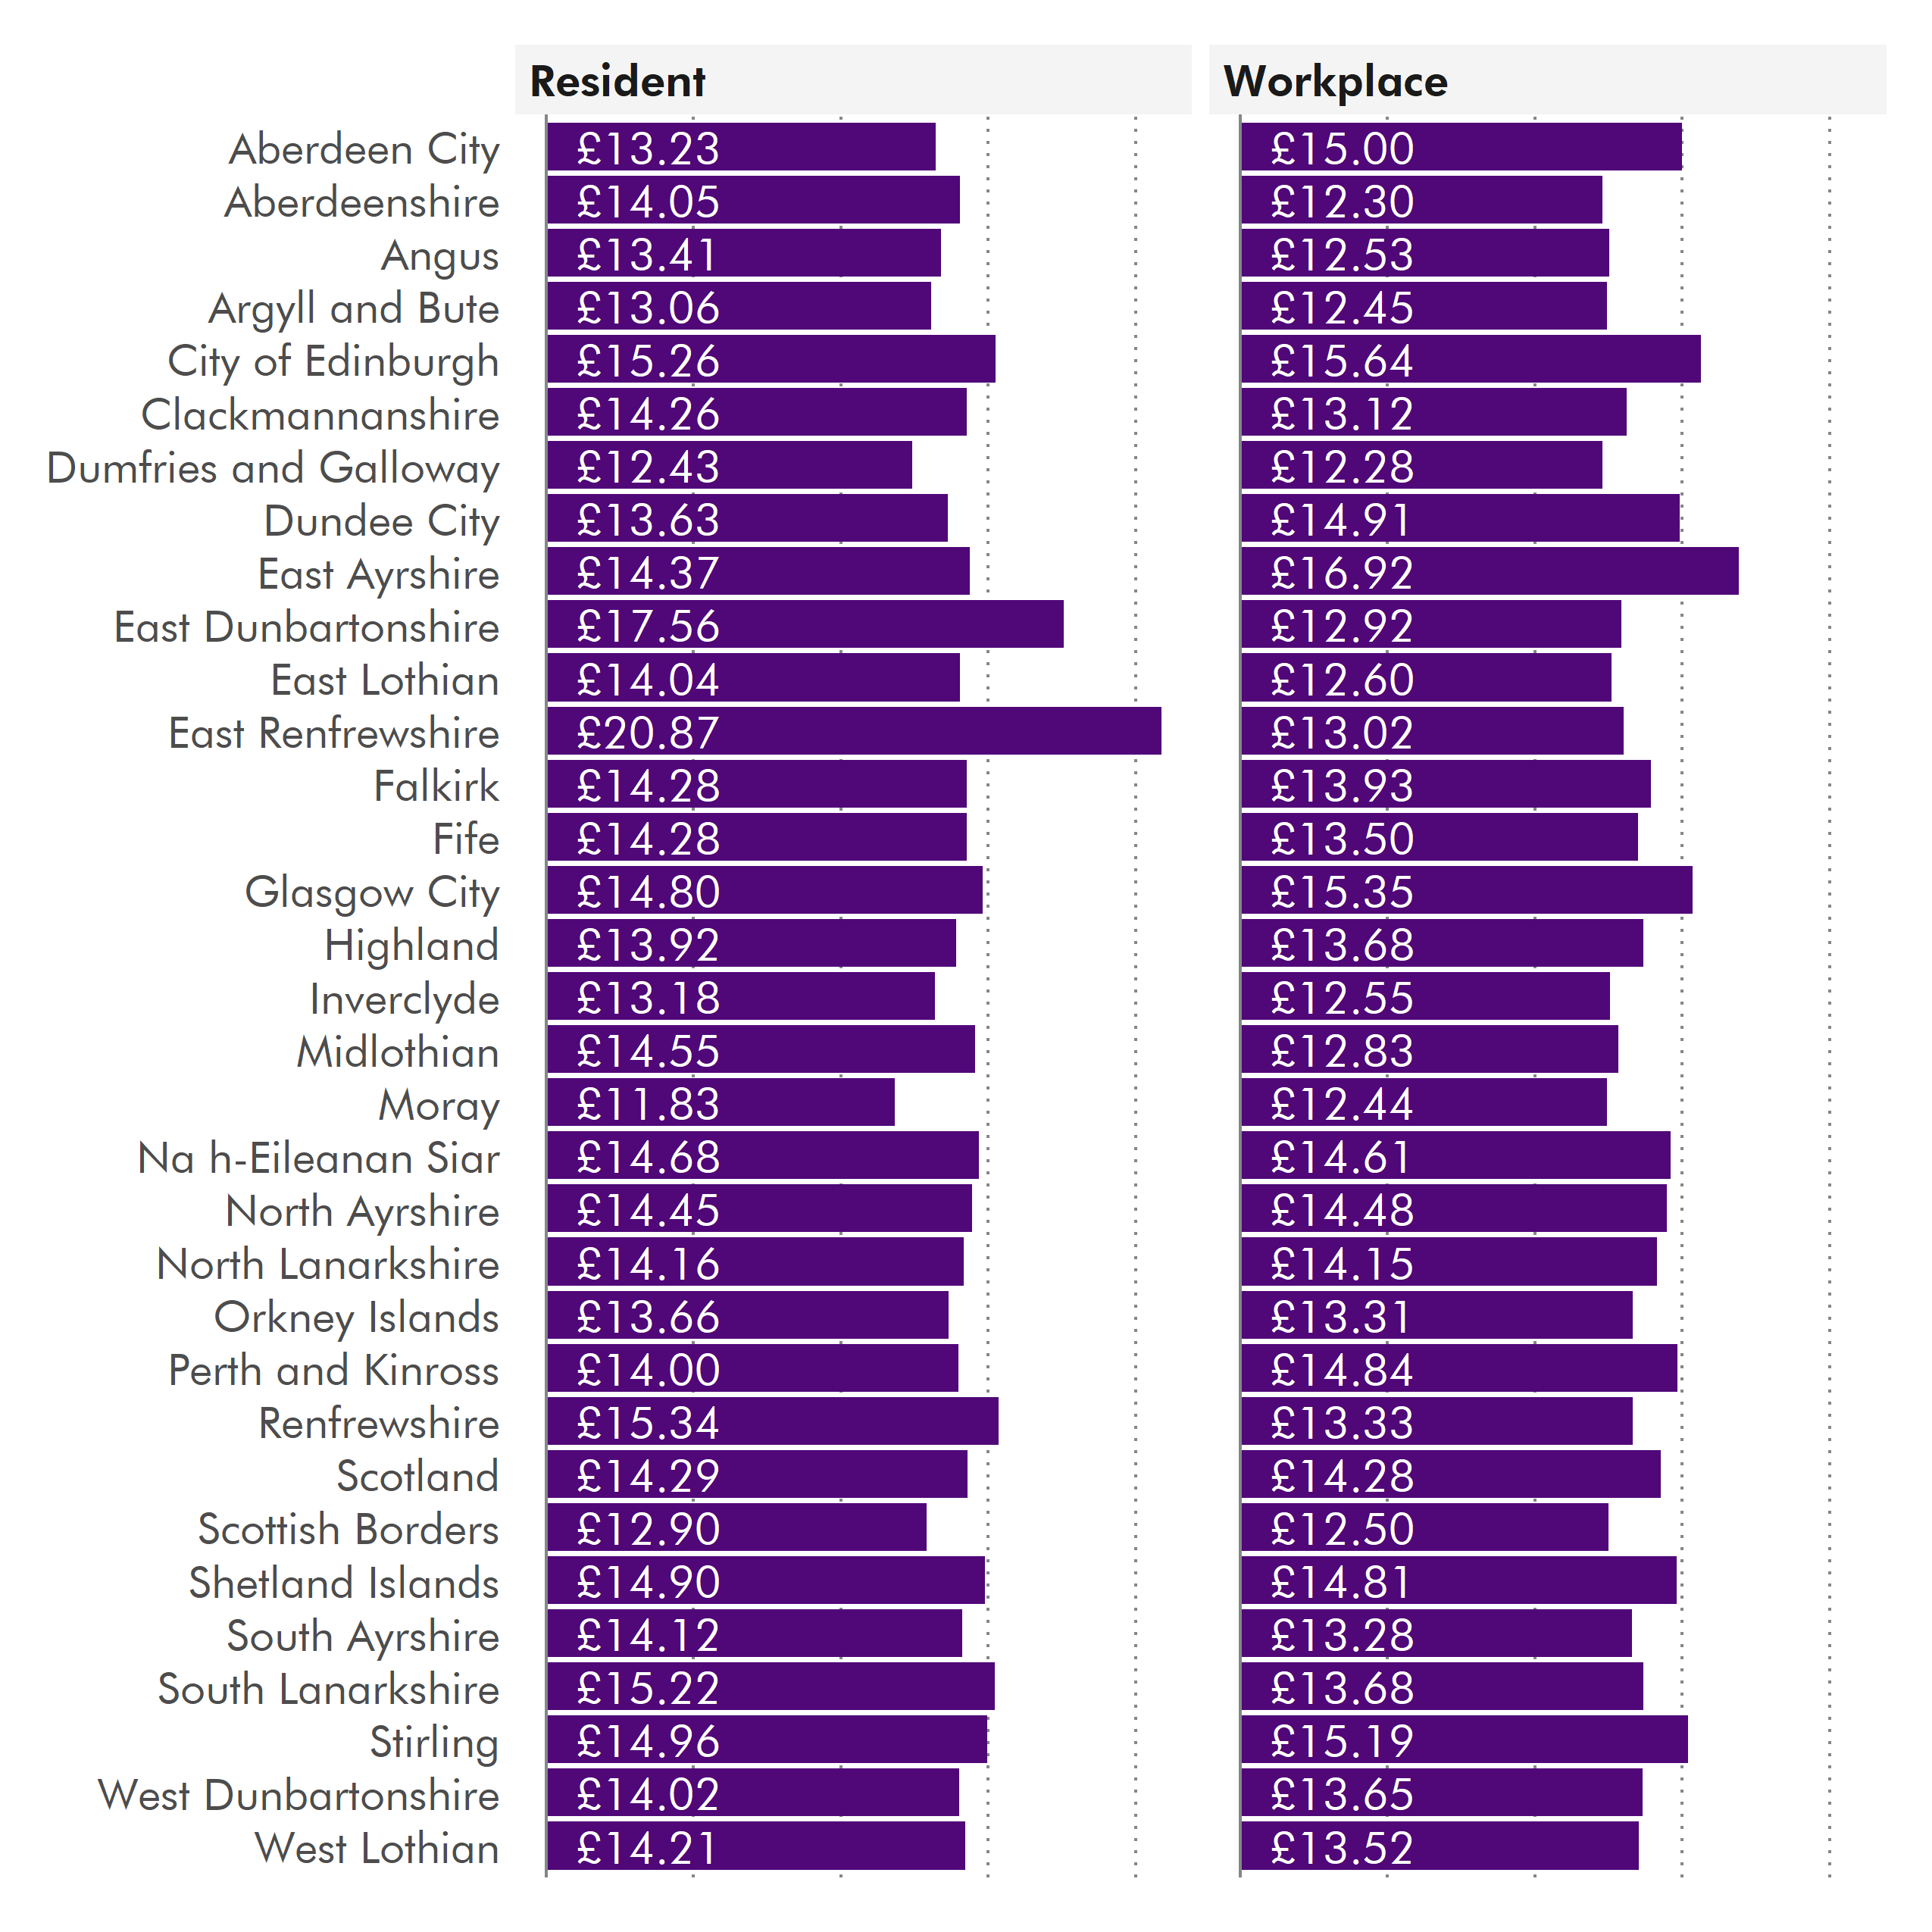 Two horizontal bar chart representing the hourly pay excluding overtime for each local authority in Scotland. The first on the left shows the data for where an employees lives and the one on the right show the data for where employees works. More detail can be found in the text below.